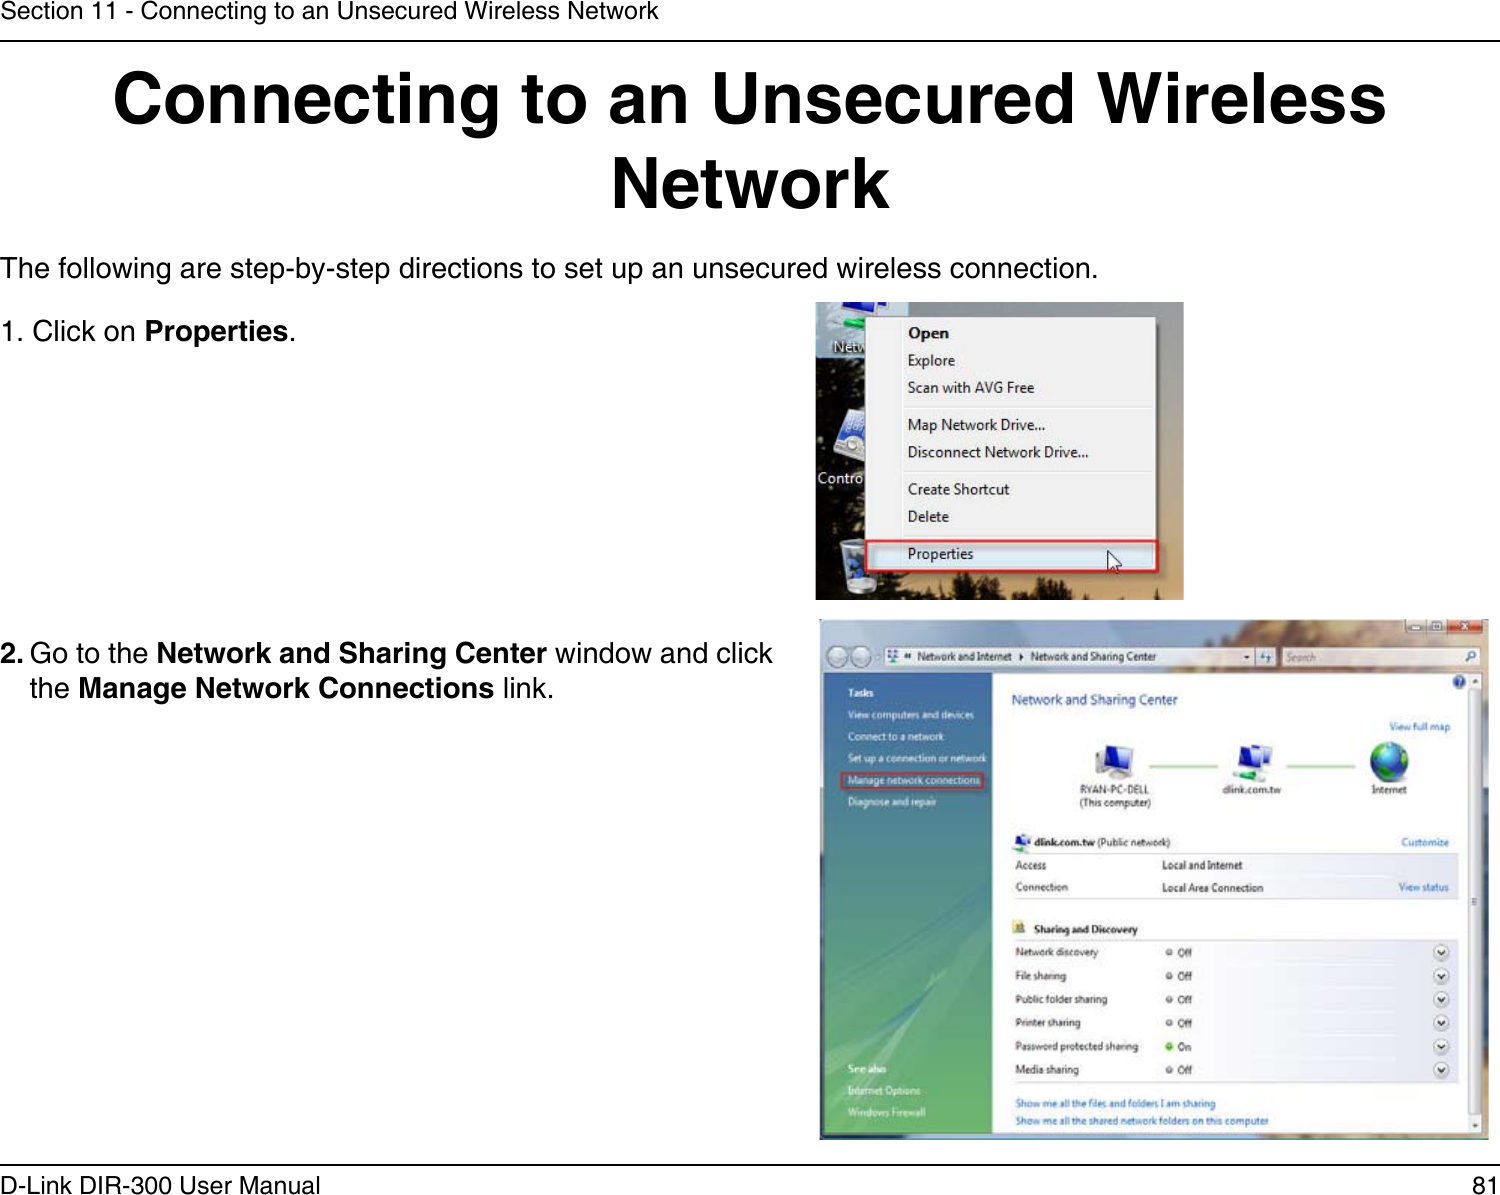 81D-Link DIR-300 User ManualSection 11 - Connecting to an Unsecured Wireless NetworkConnecting to an Unsecured Wireless NetworkThe following are step-by-step directions to set up an unsecured wireless connection.2. Go to the Network and Sharing Center window and click the Manage Network Connections link. 1. Click on Properties.     